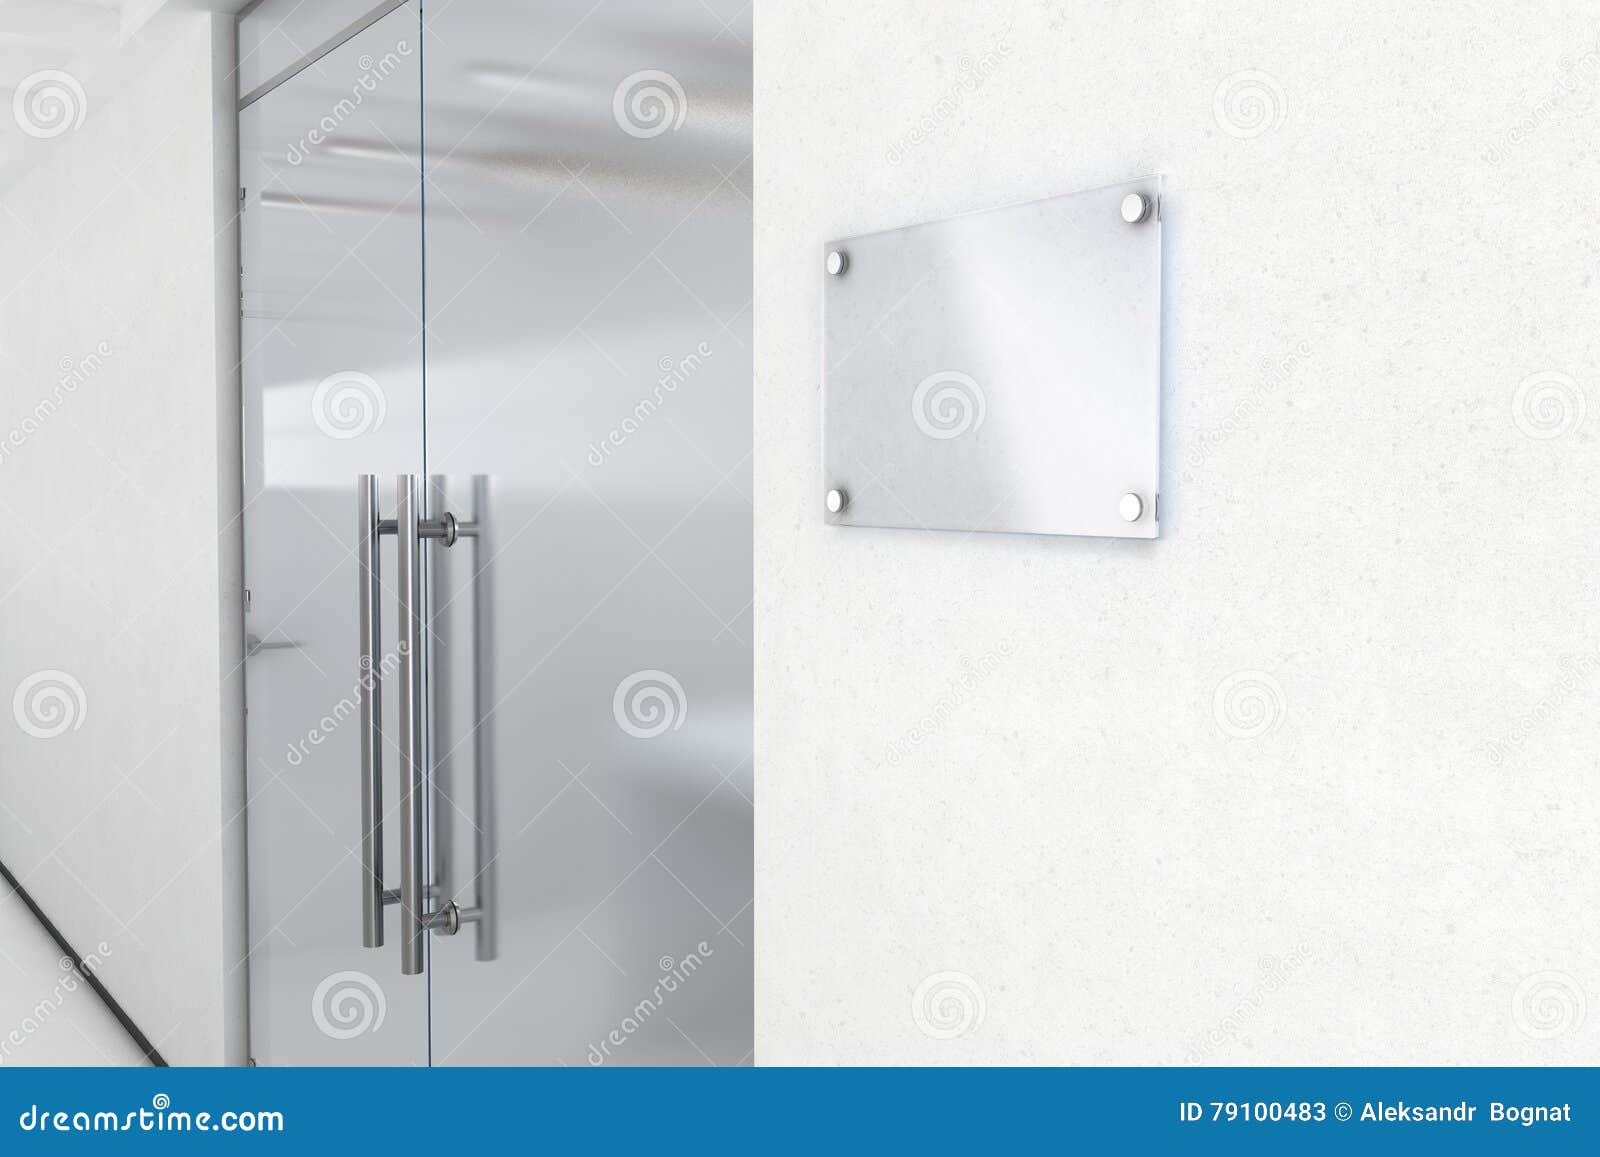 Download 543 Door Glass Mockup Photos Free Royalty Free Stock Photos From Dreamstime